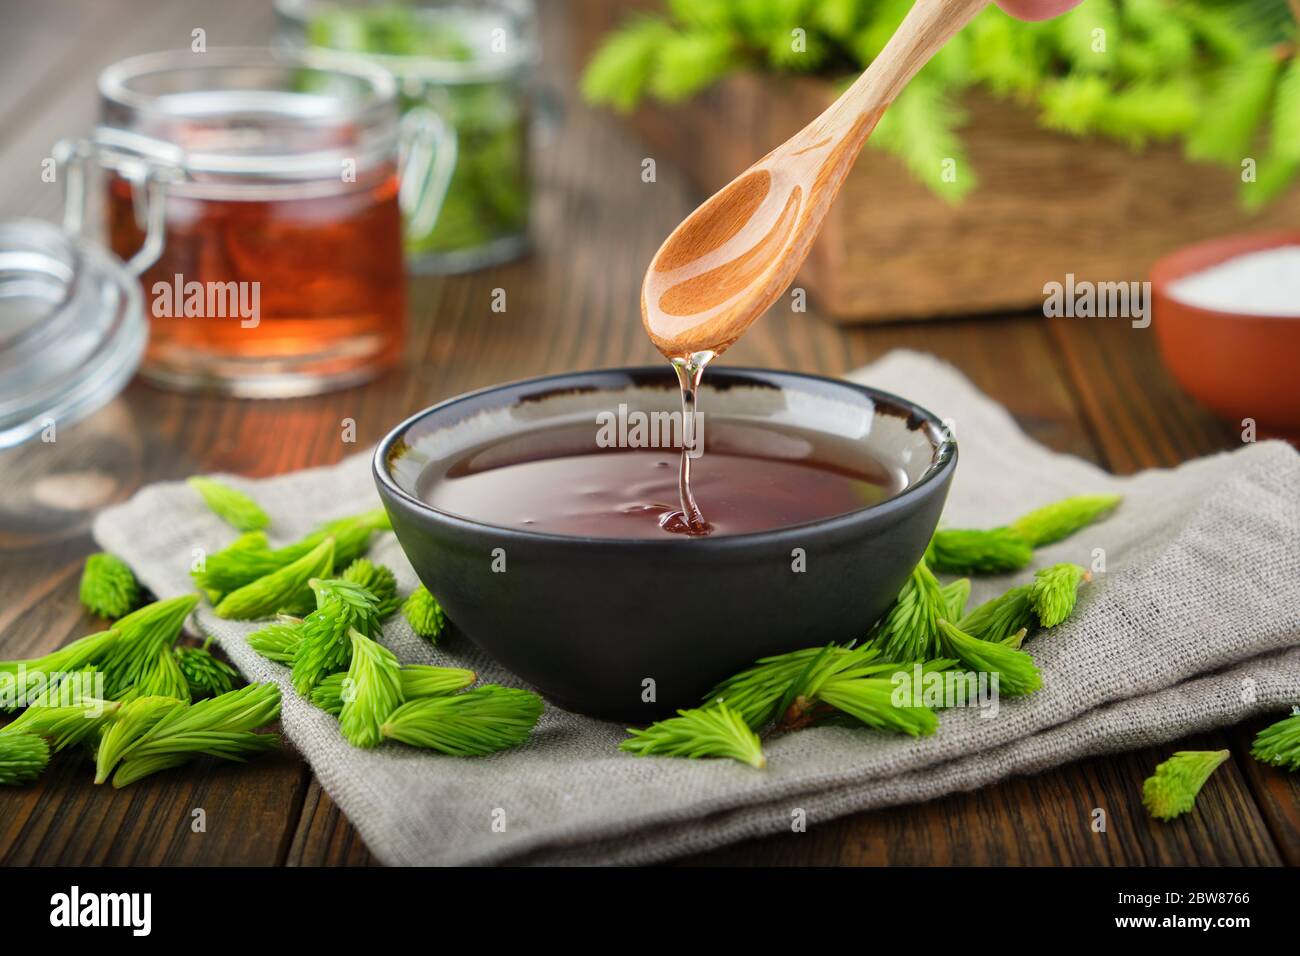 Cooked syrup or honey from spruce tips in a black bowl, jar of  jam or honey from fir buds and needles, twigs of fir tree on wooden table. Making spru Stock Photo